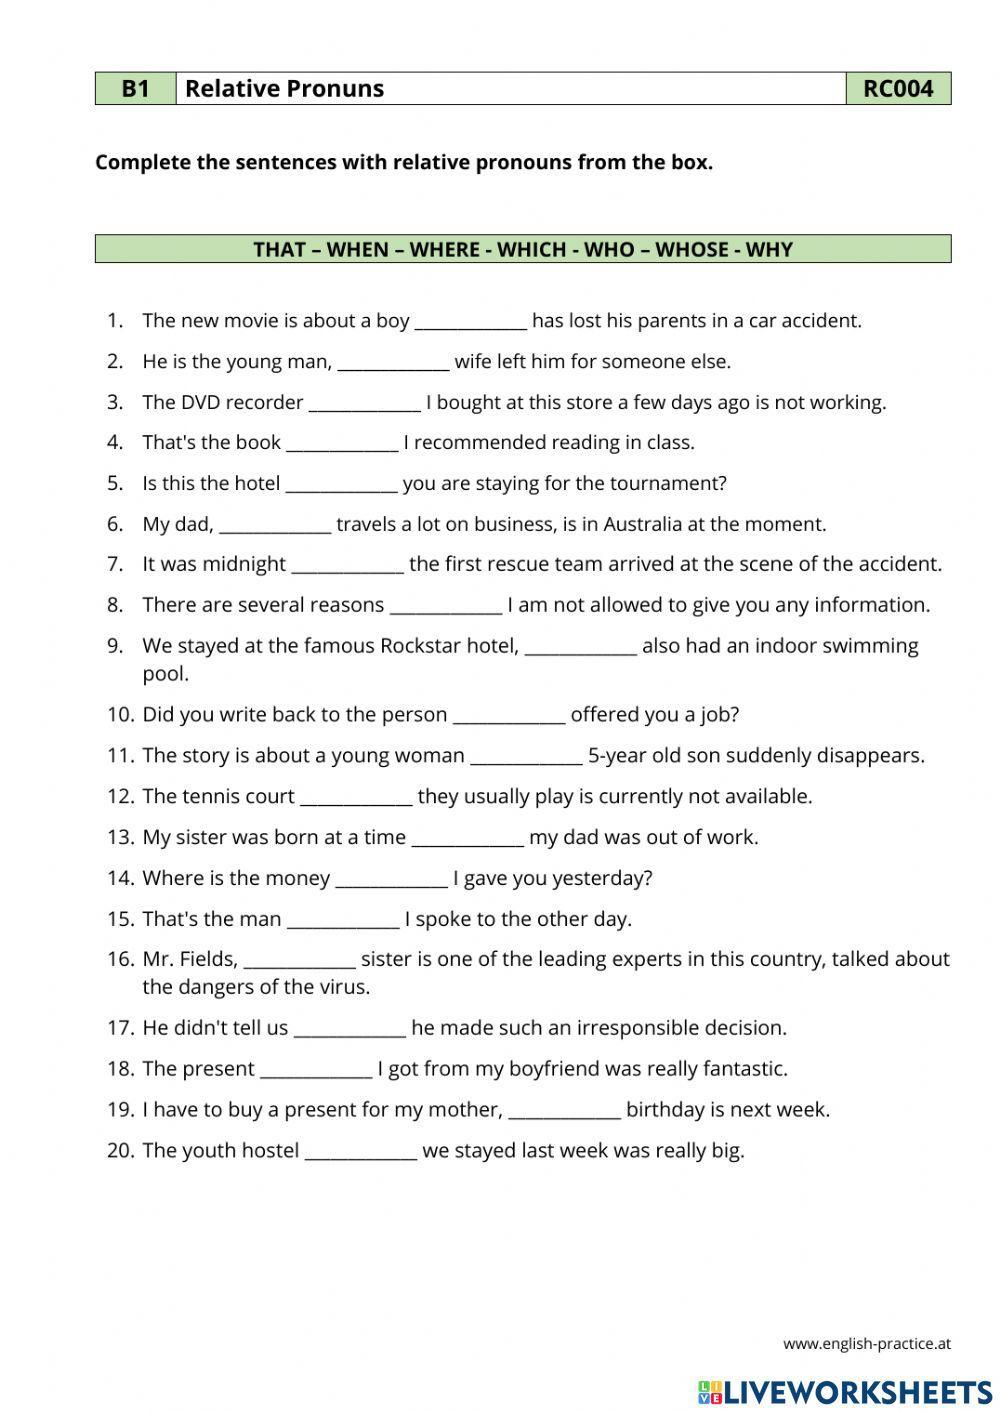 Relative clause